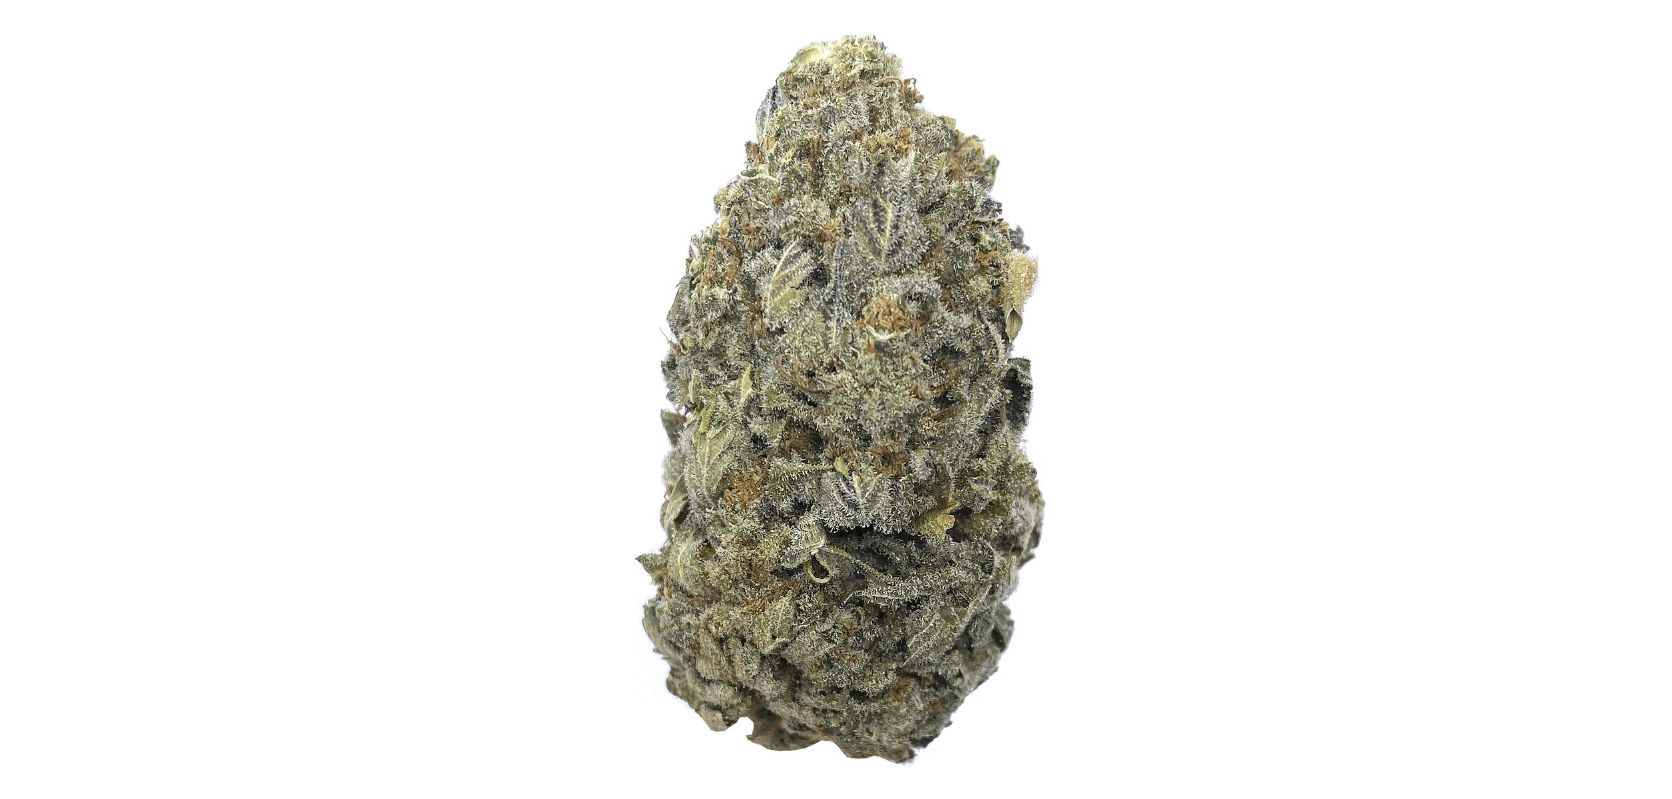 Other than intense full-body relaxation, the Super Pink strain is touted to bring a sense of mental clarity, peace, and euphoria.